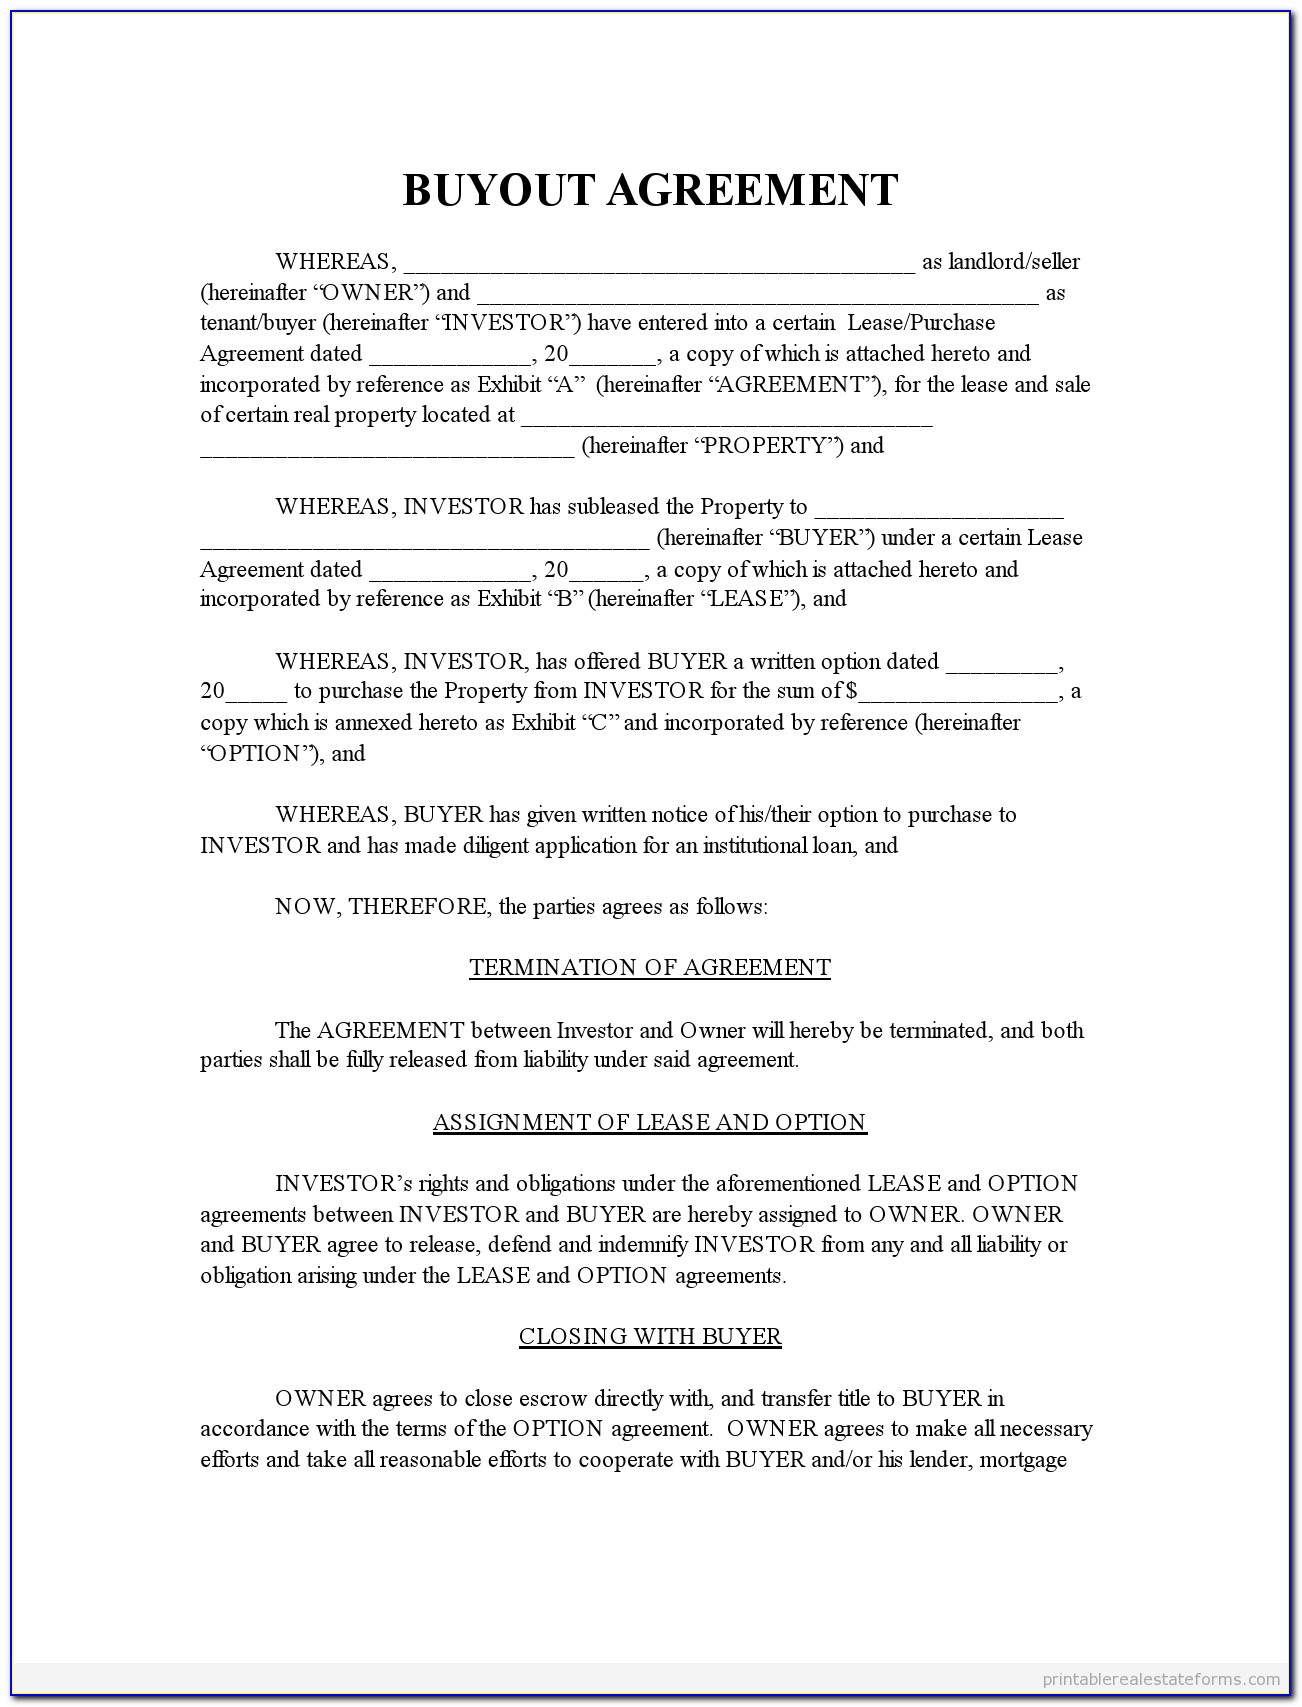 Employee Equity Compensation Agreement Template